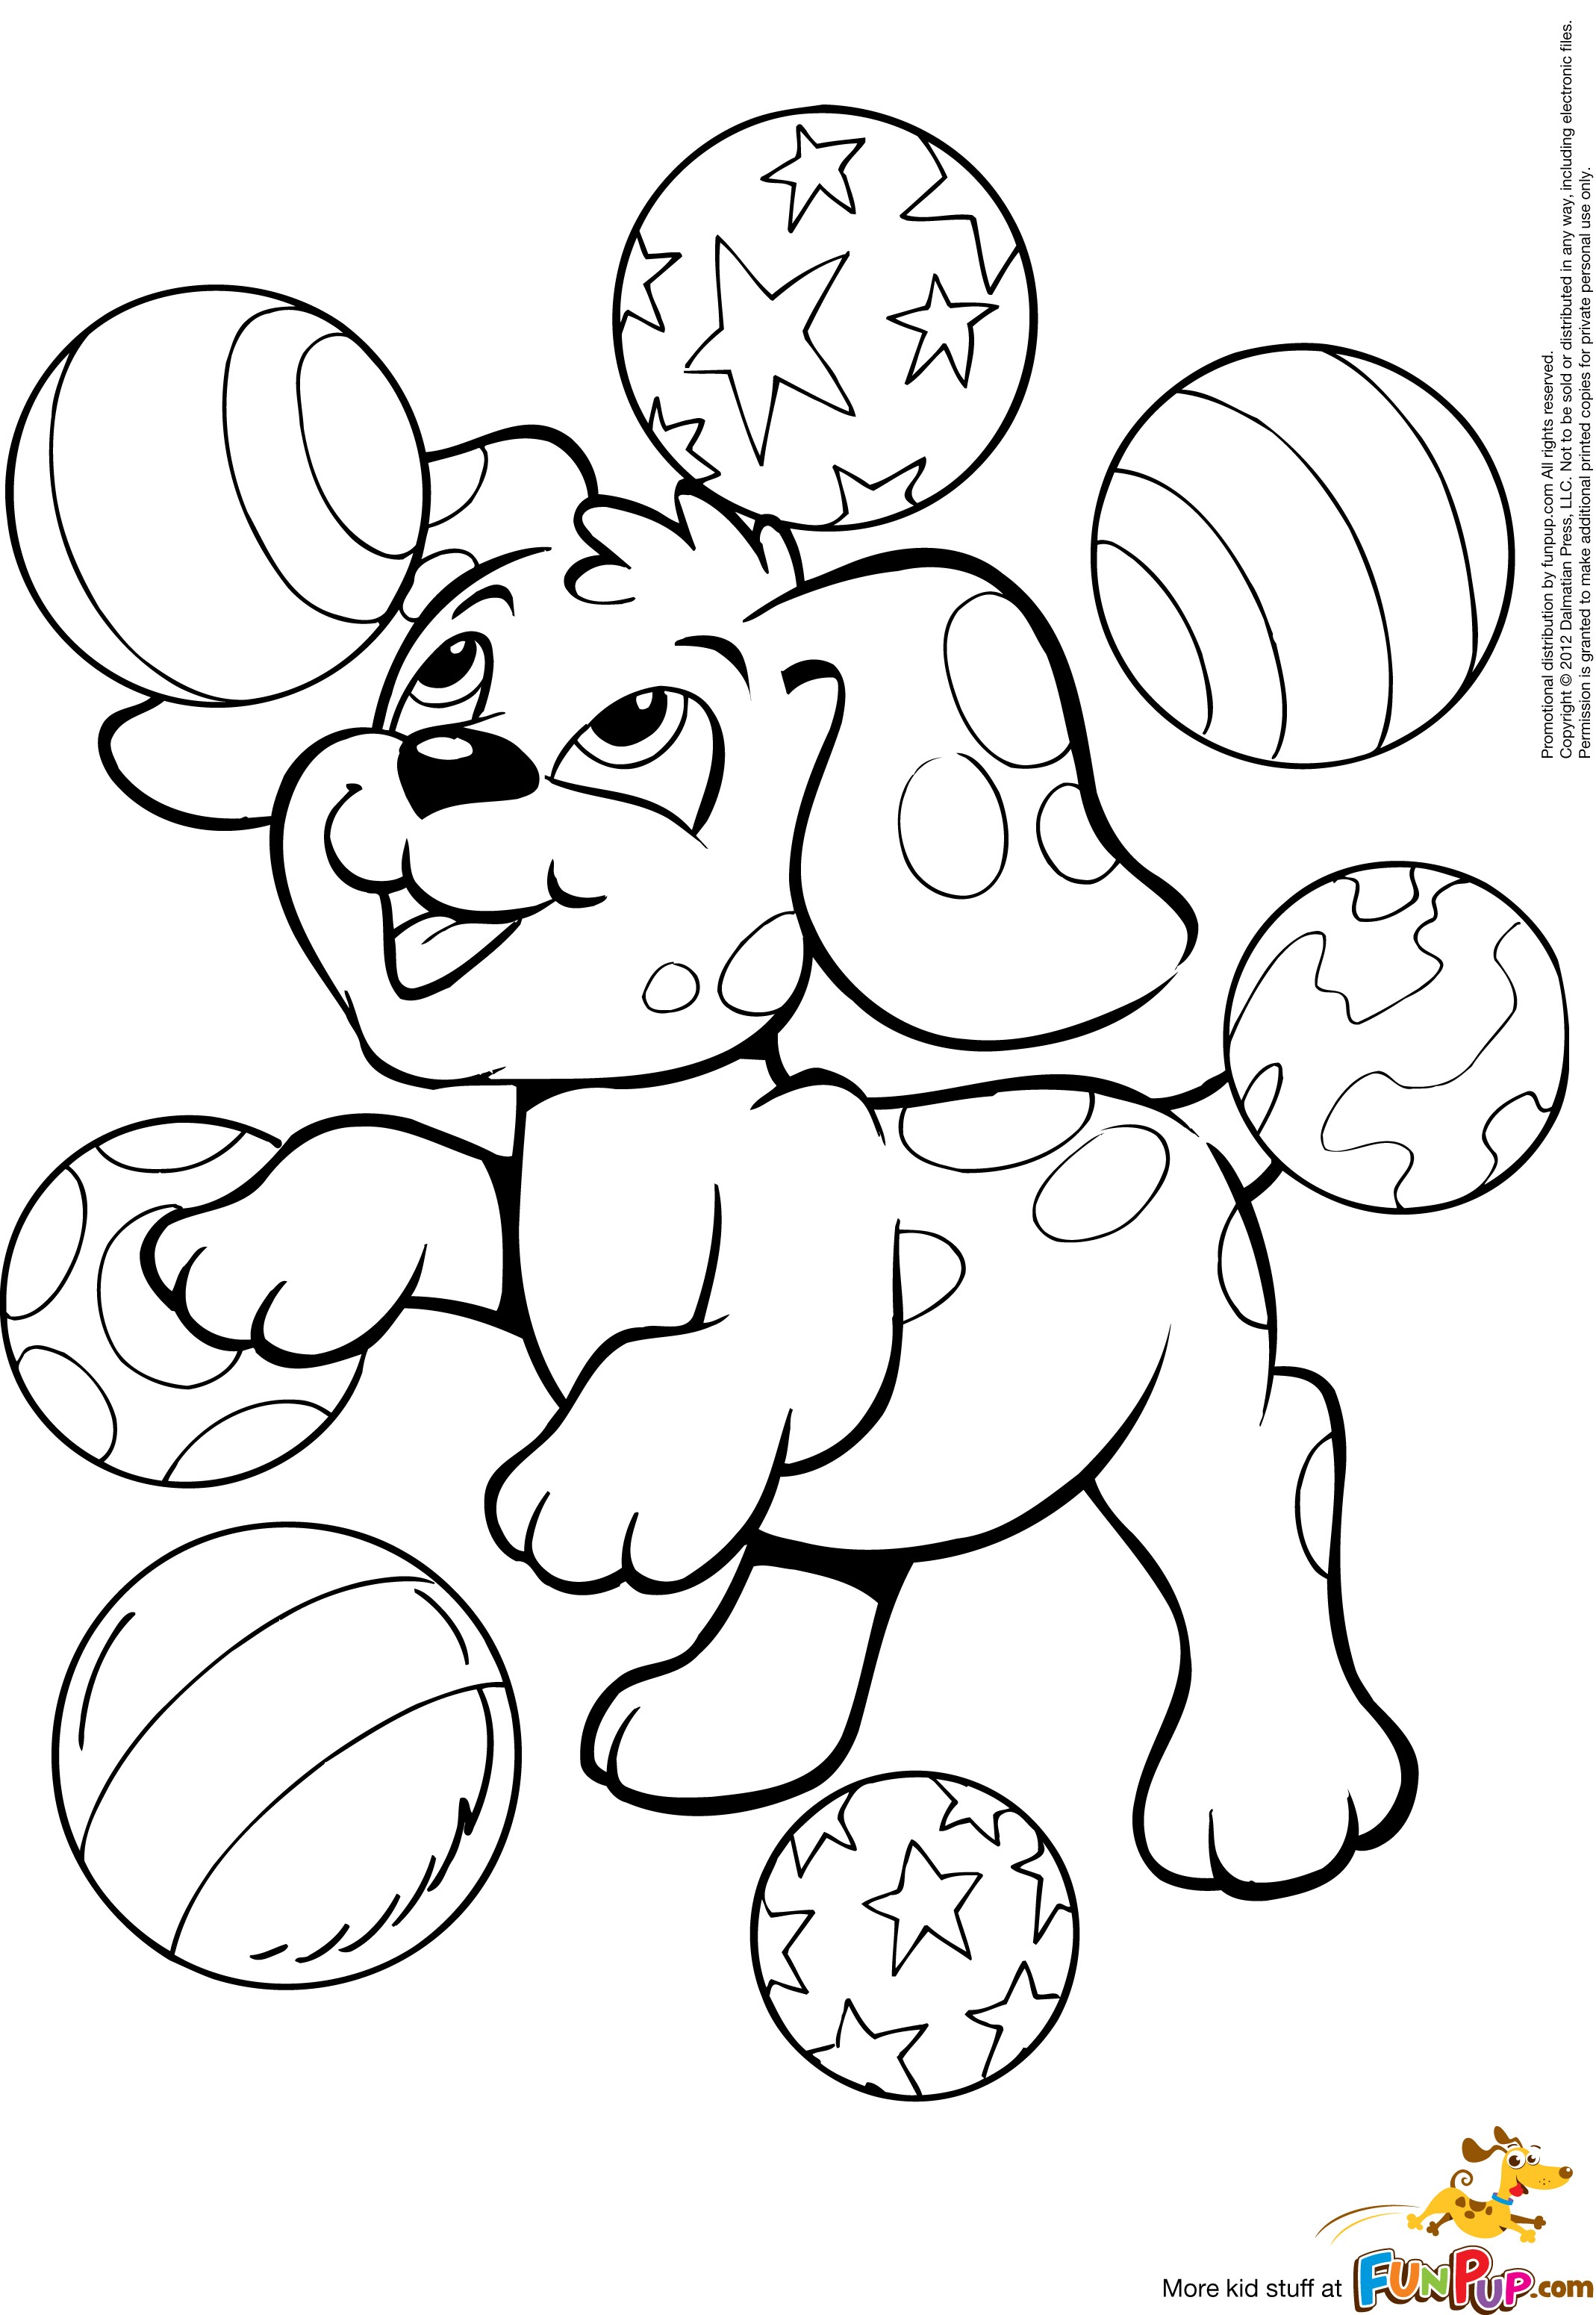 Coloring Pages Puppies Printables At GetDrawings Free Download